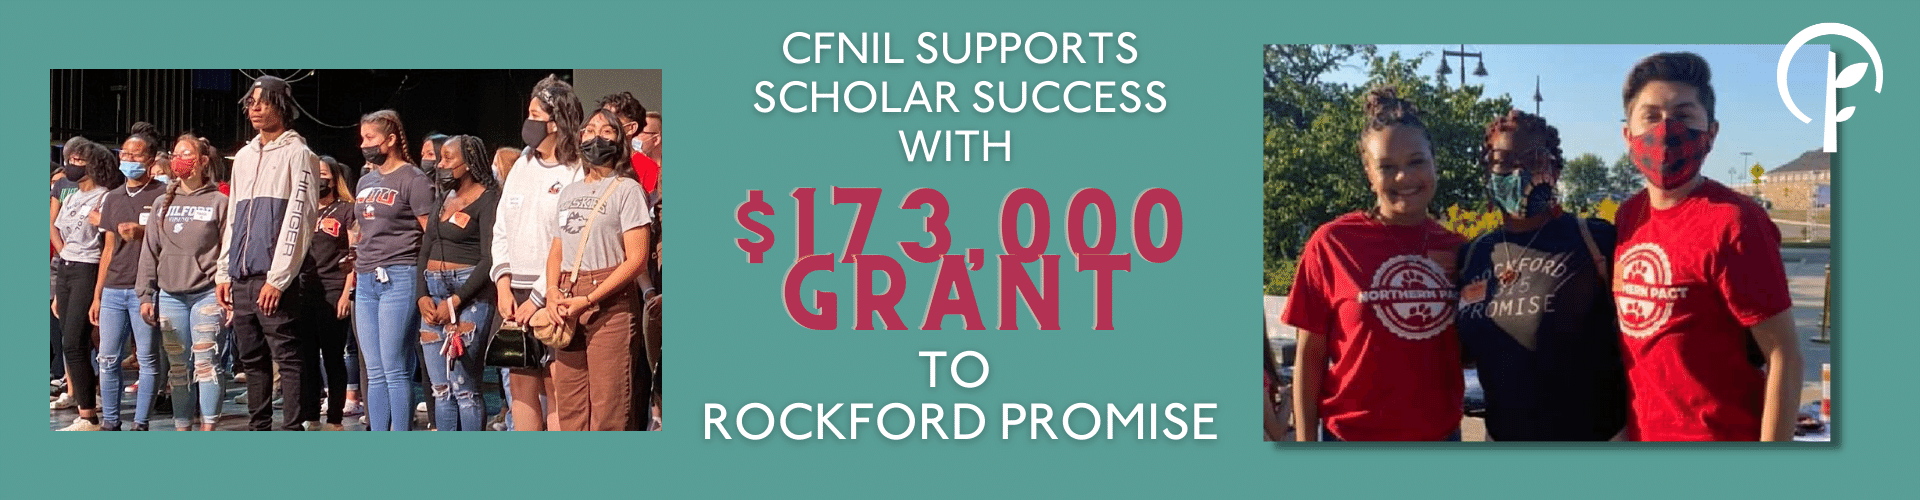 CFNIL Announces $173,000 Grant to Rockford Promise